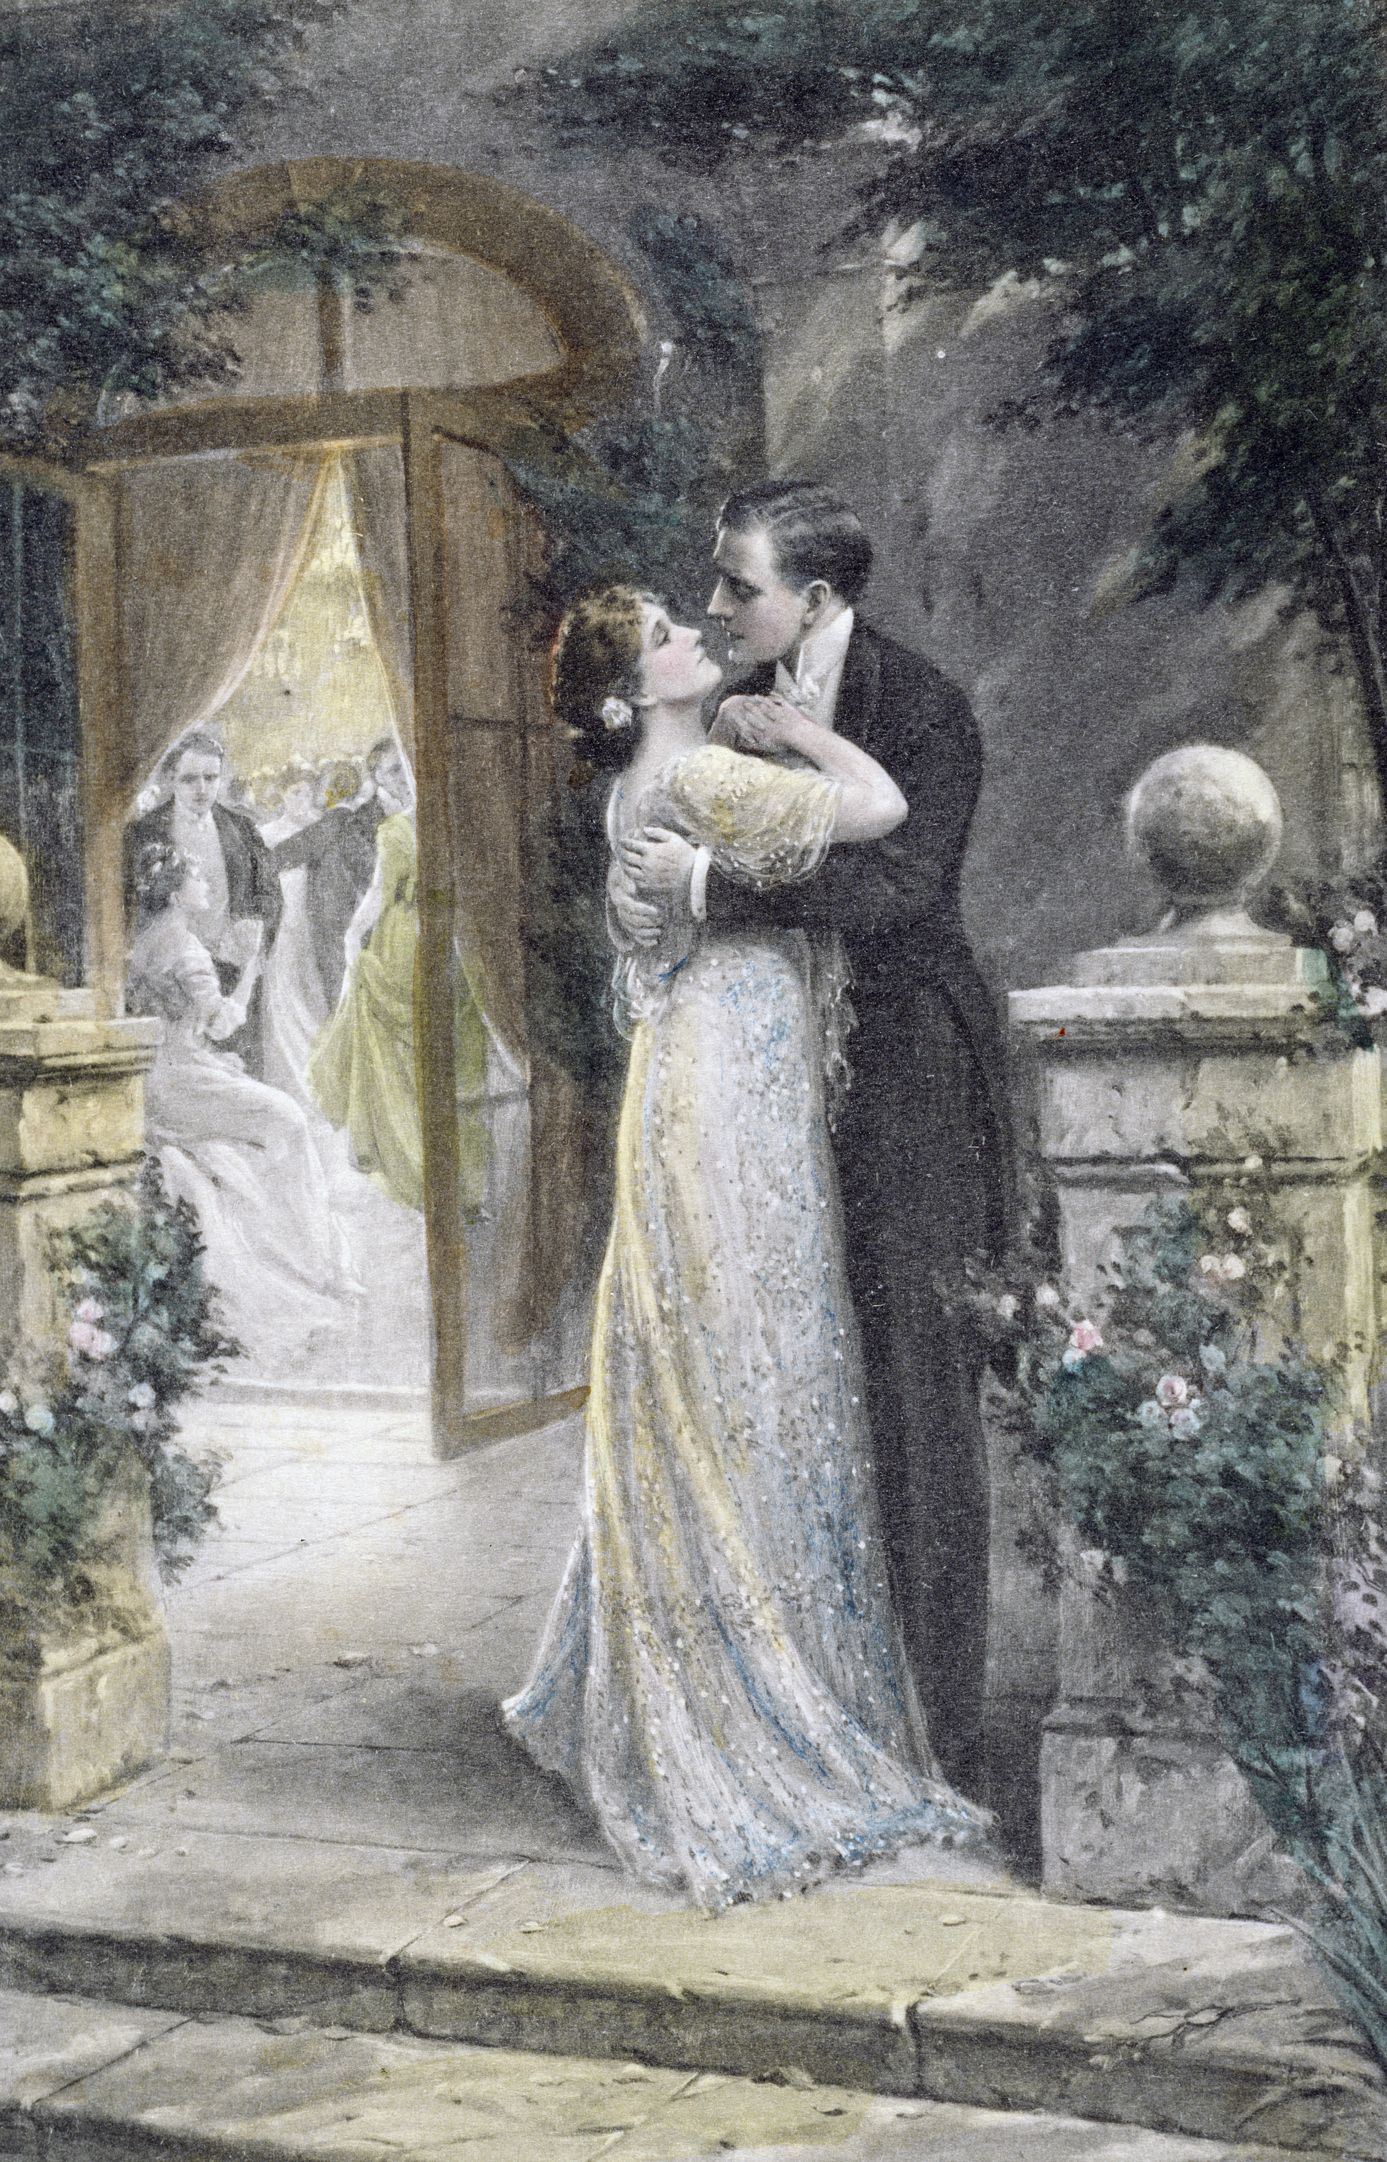 Marriage in the Victorian Era